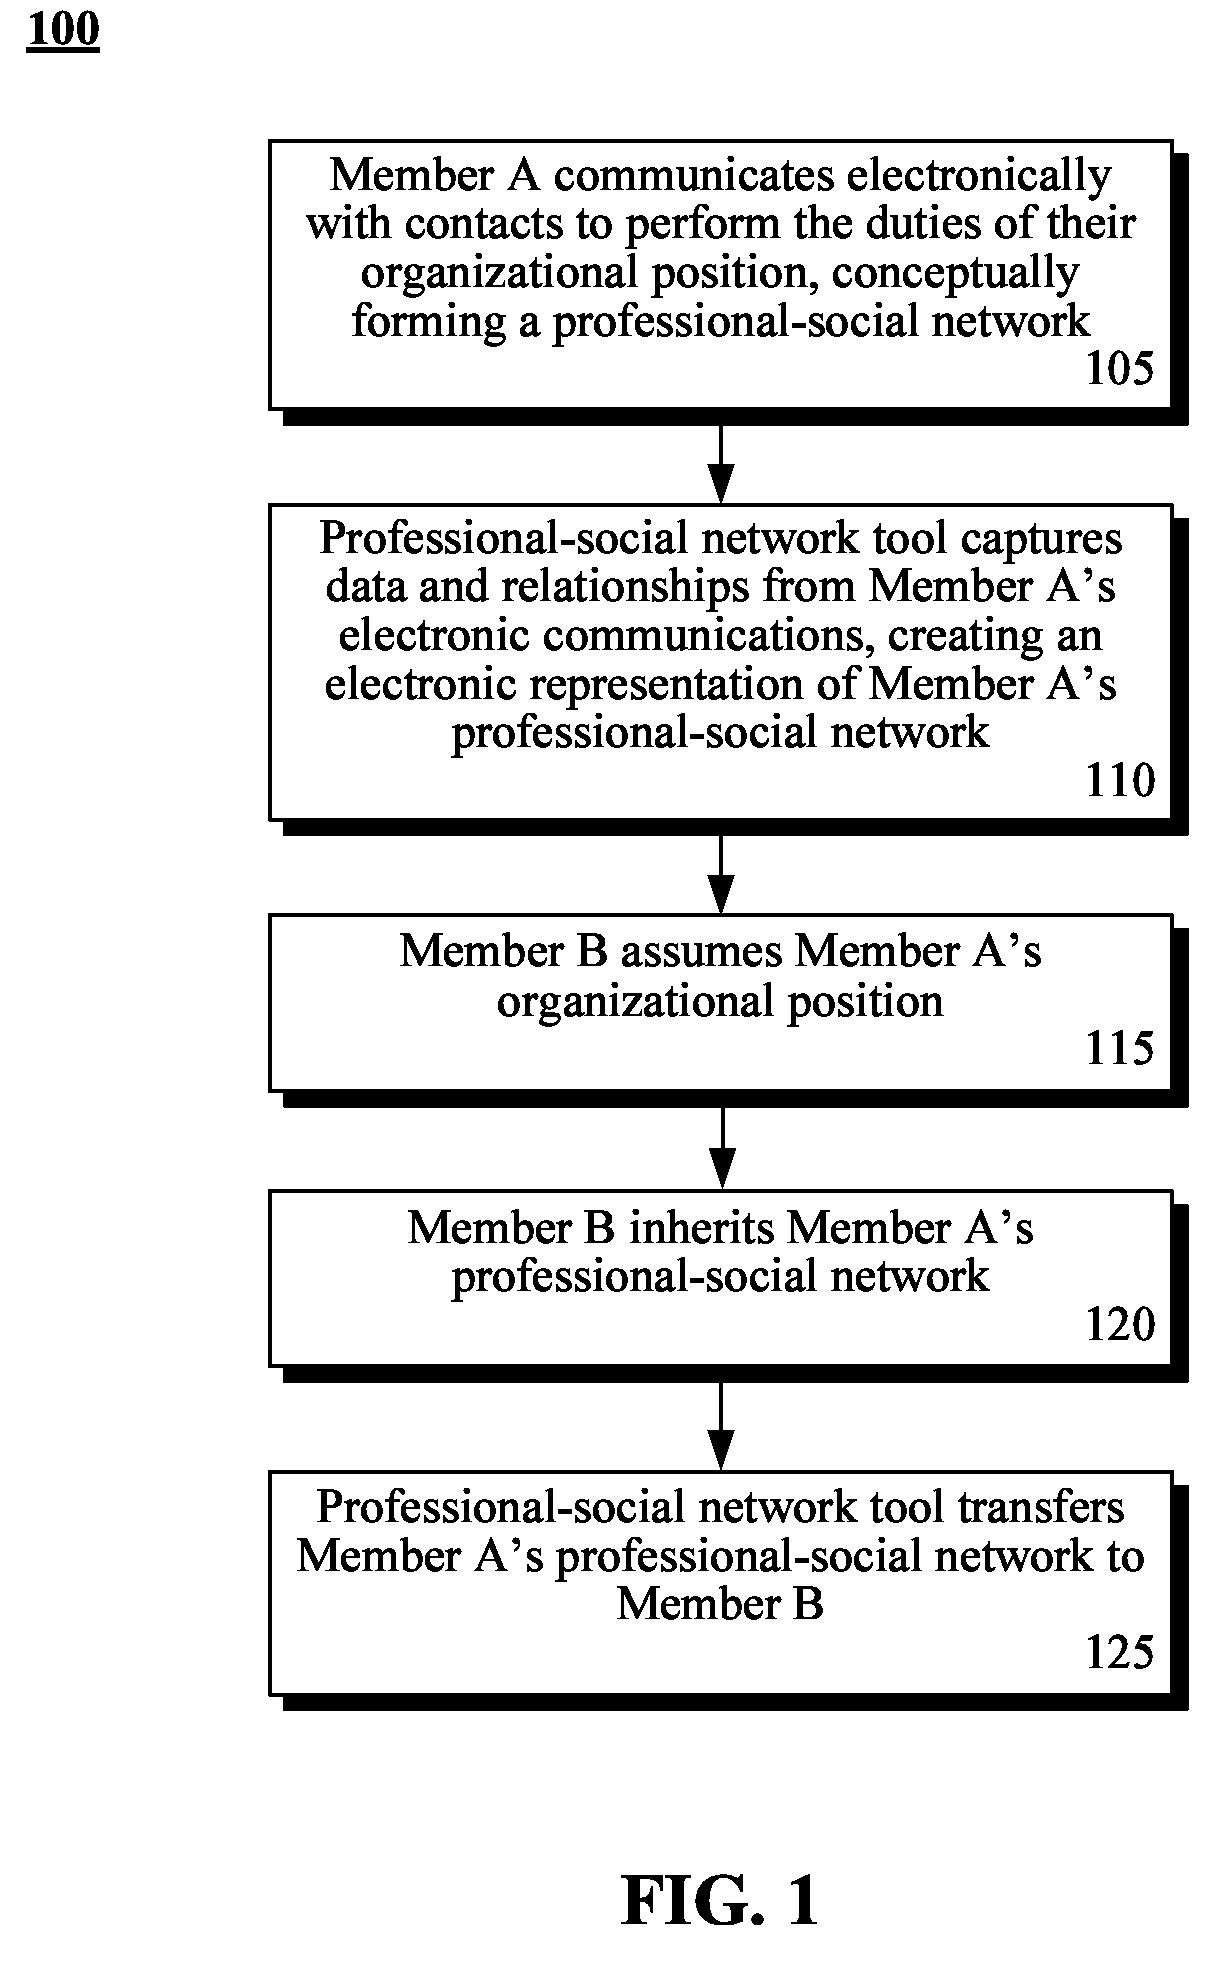 Using the inheritance of professional-social network information to facilitate organizational position changes